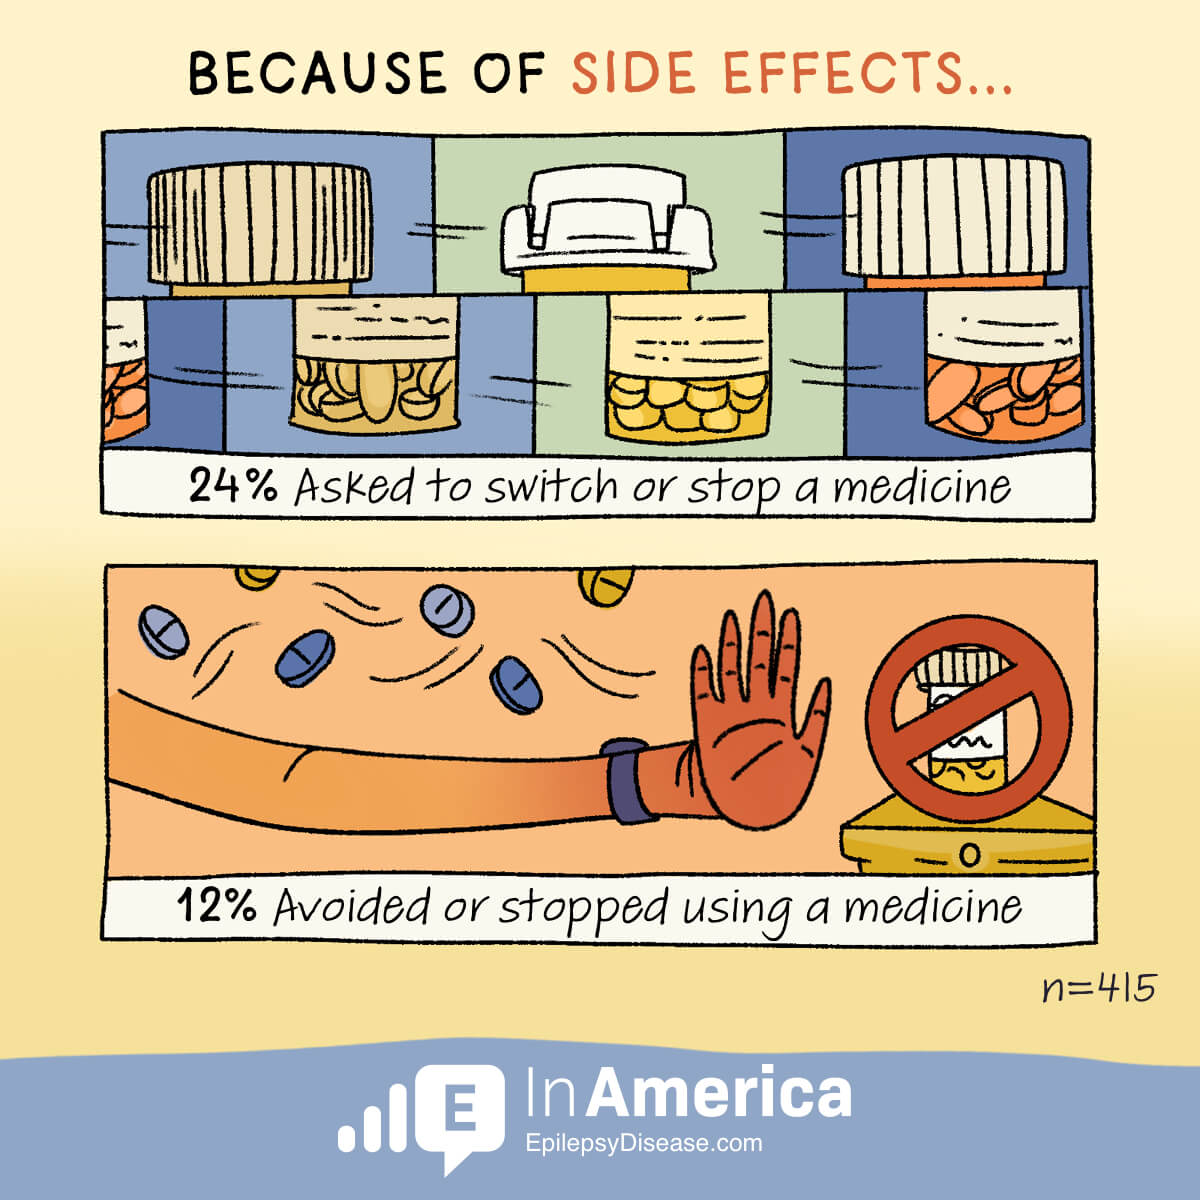 Because of side effects, 24% asked to switch or stop a medicine and 12% avoided or stopped using a medicine. 